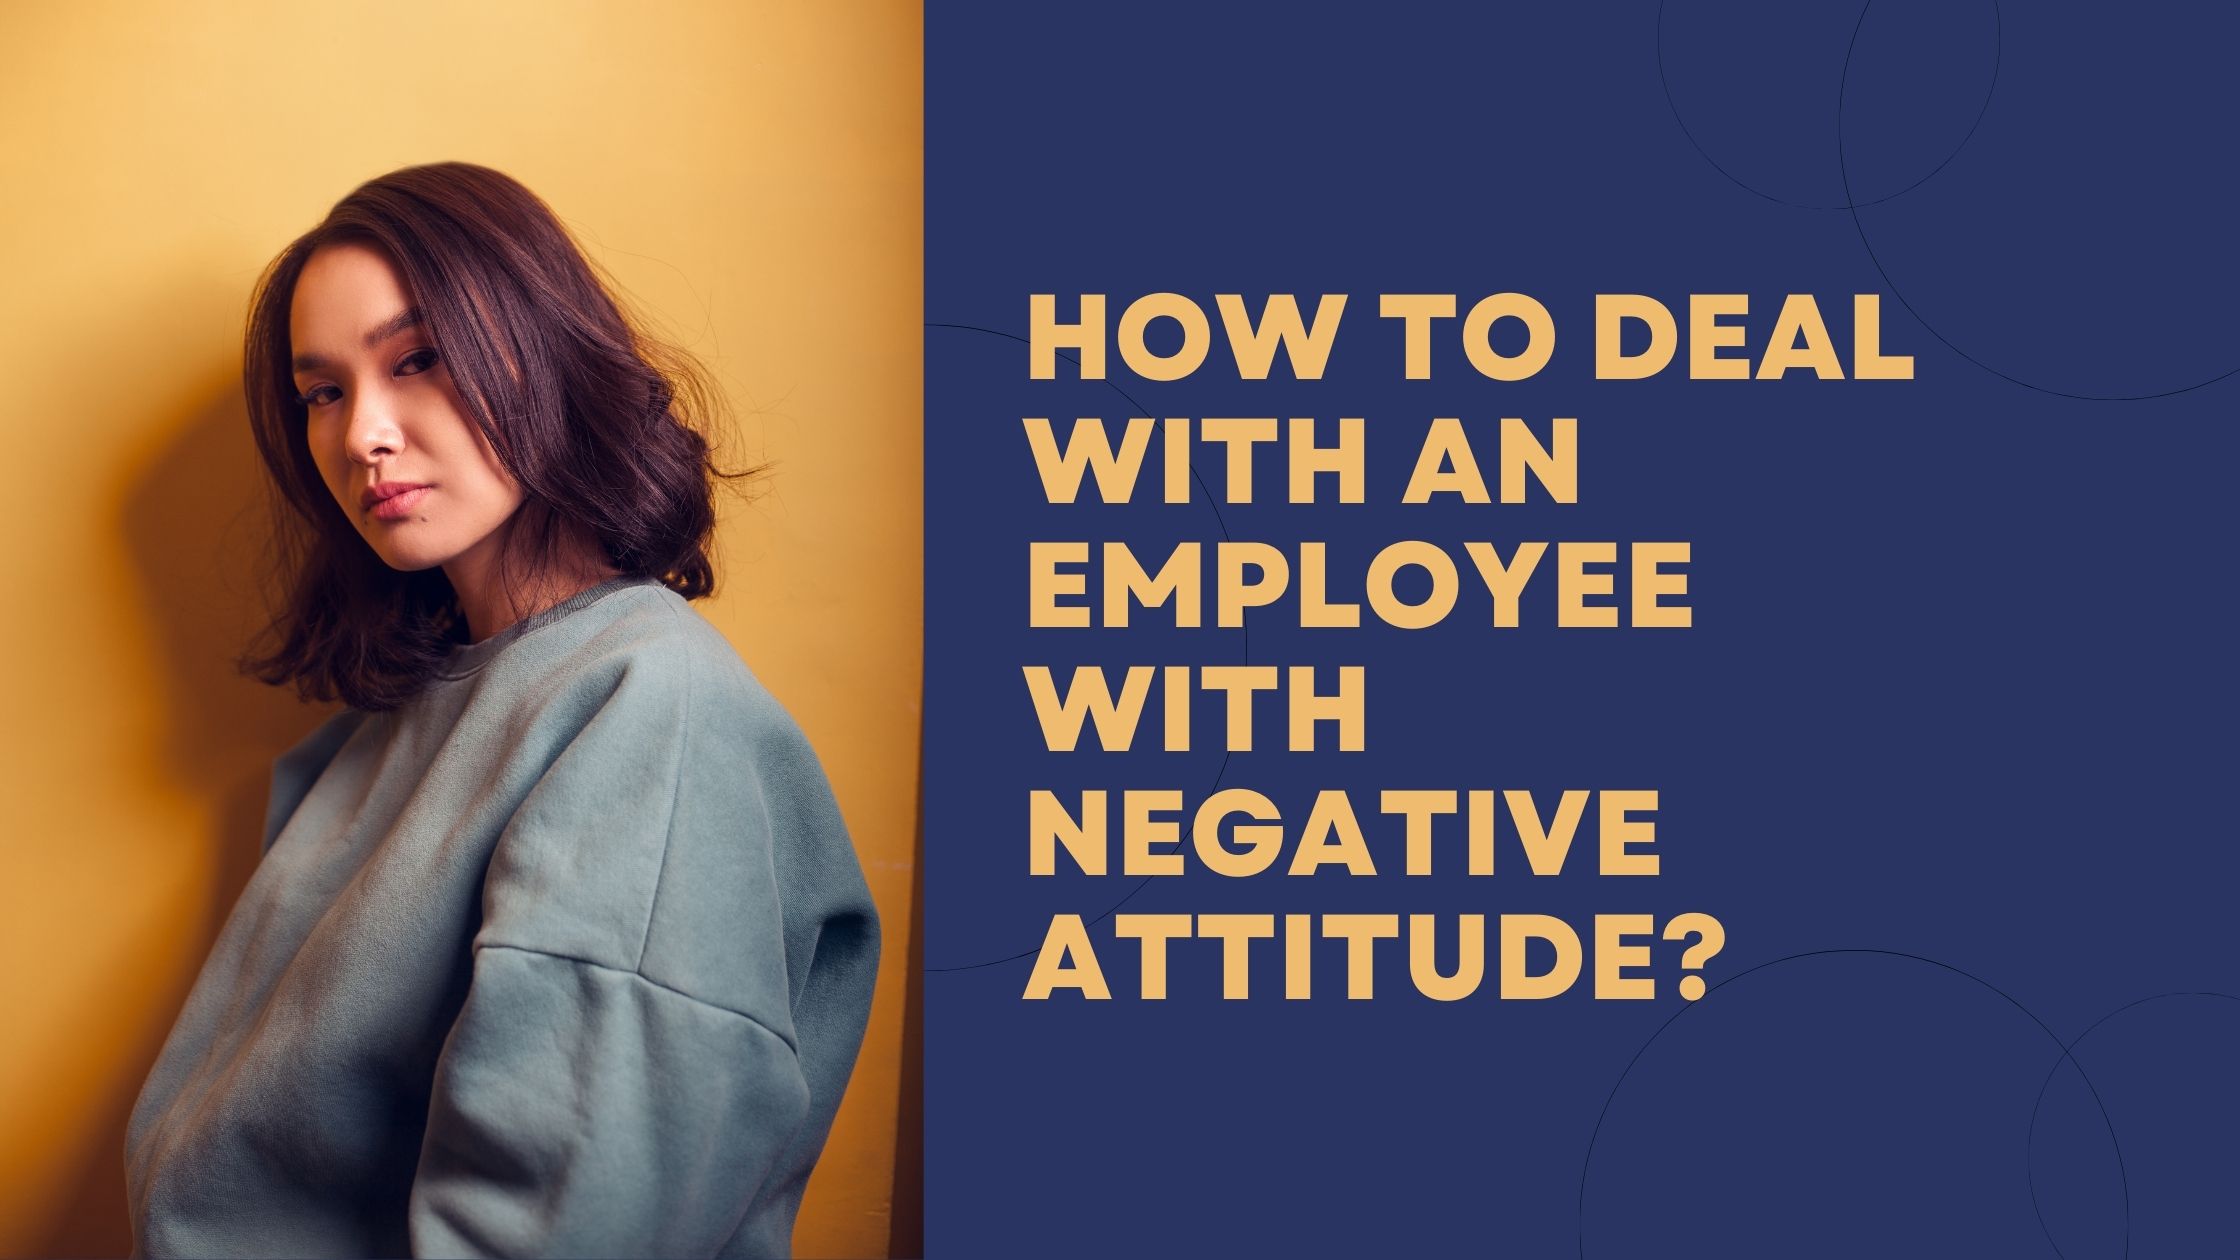 How to deal with an employee with negative toxic attitude